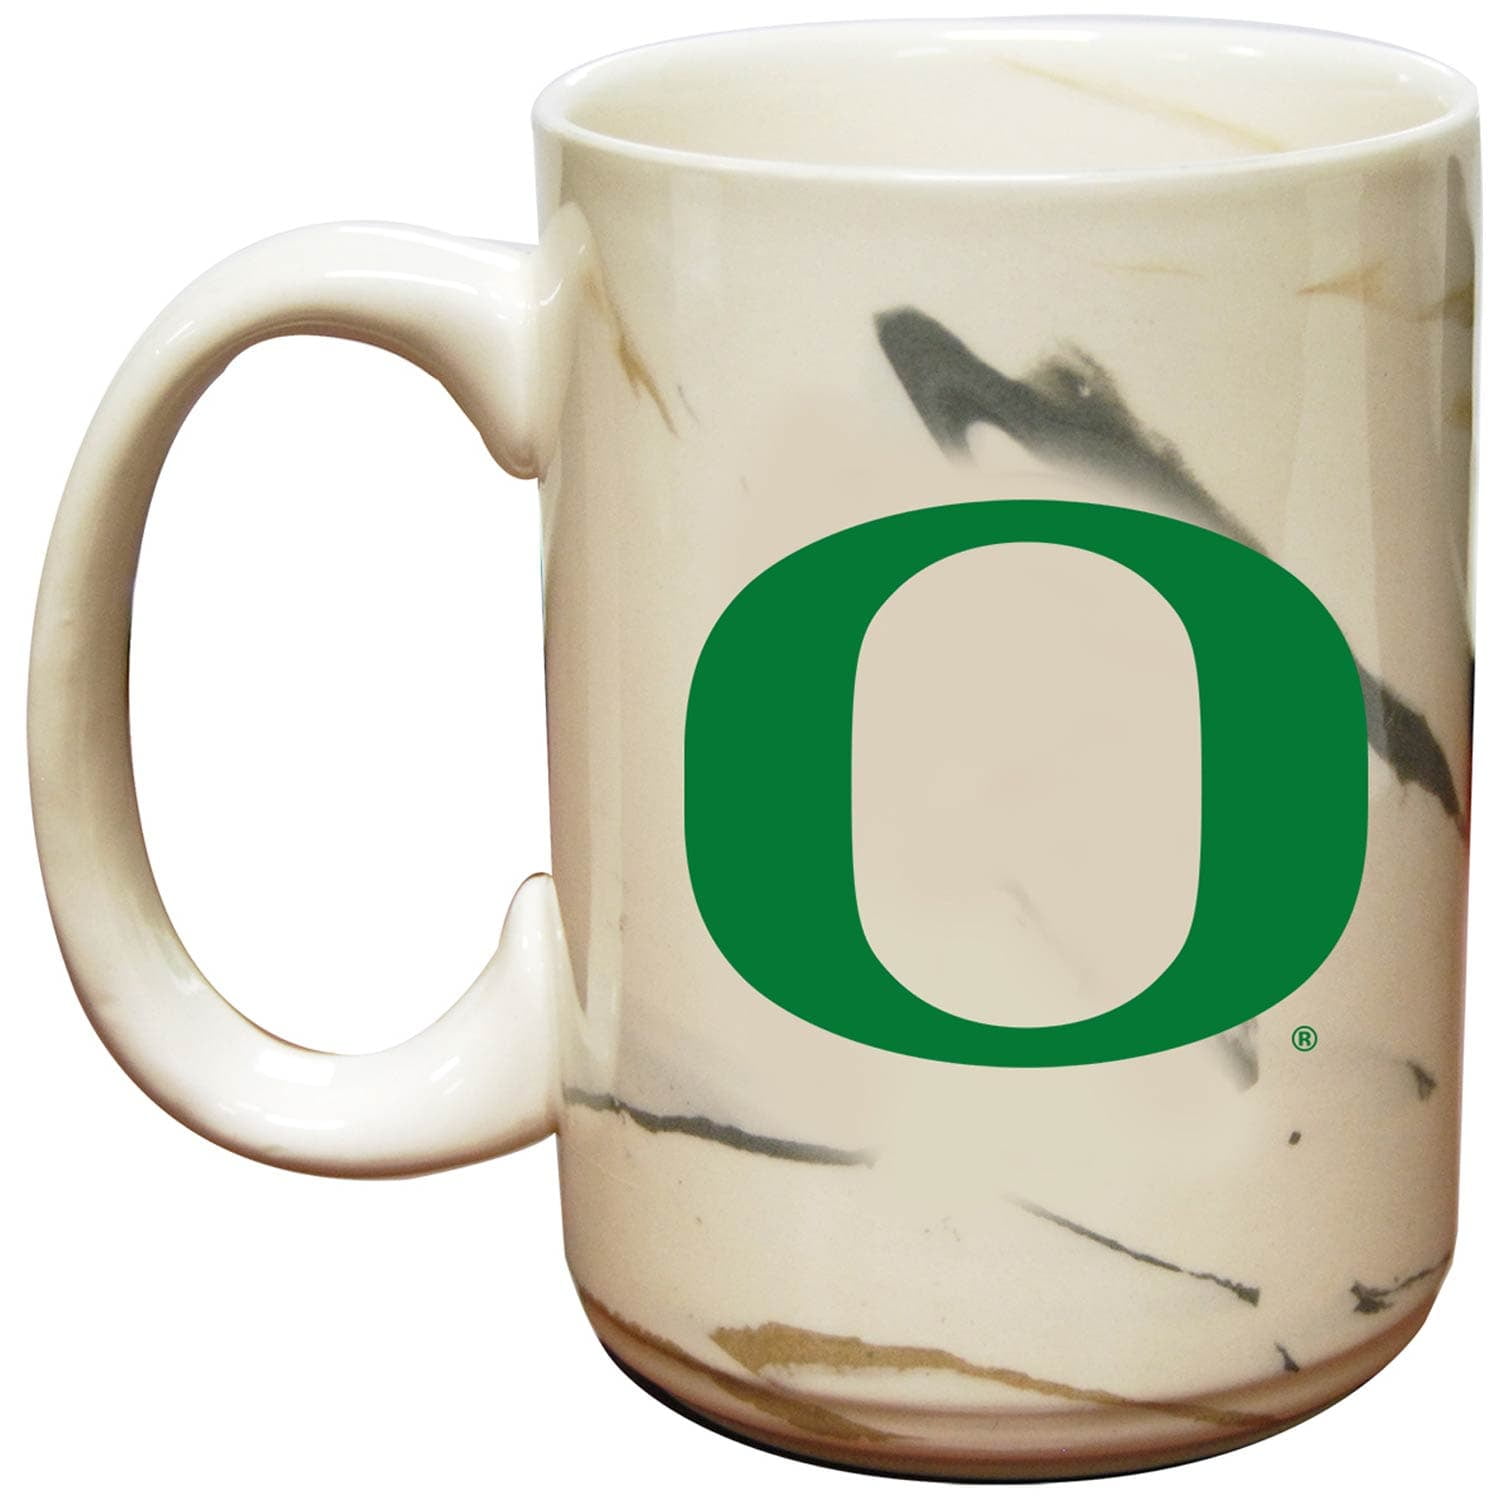 Duck Mom To Go Cup Duck Coffee Cup Oregon Duck Mom Duck Lover Gift Travel Mug Best Duck Mama Ever Duck Parent Gift Duck Mug